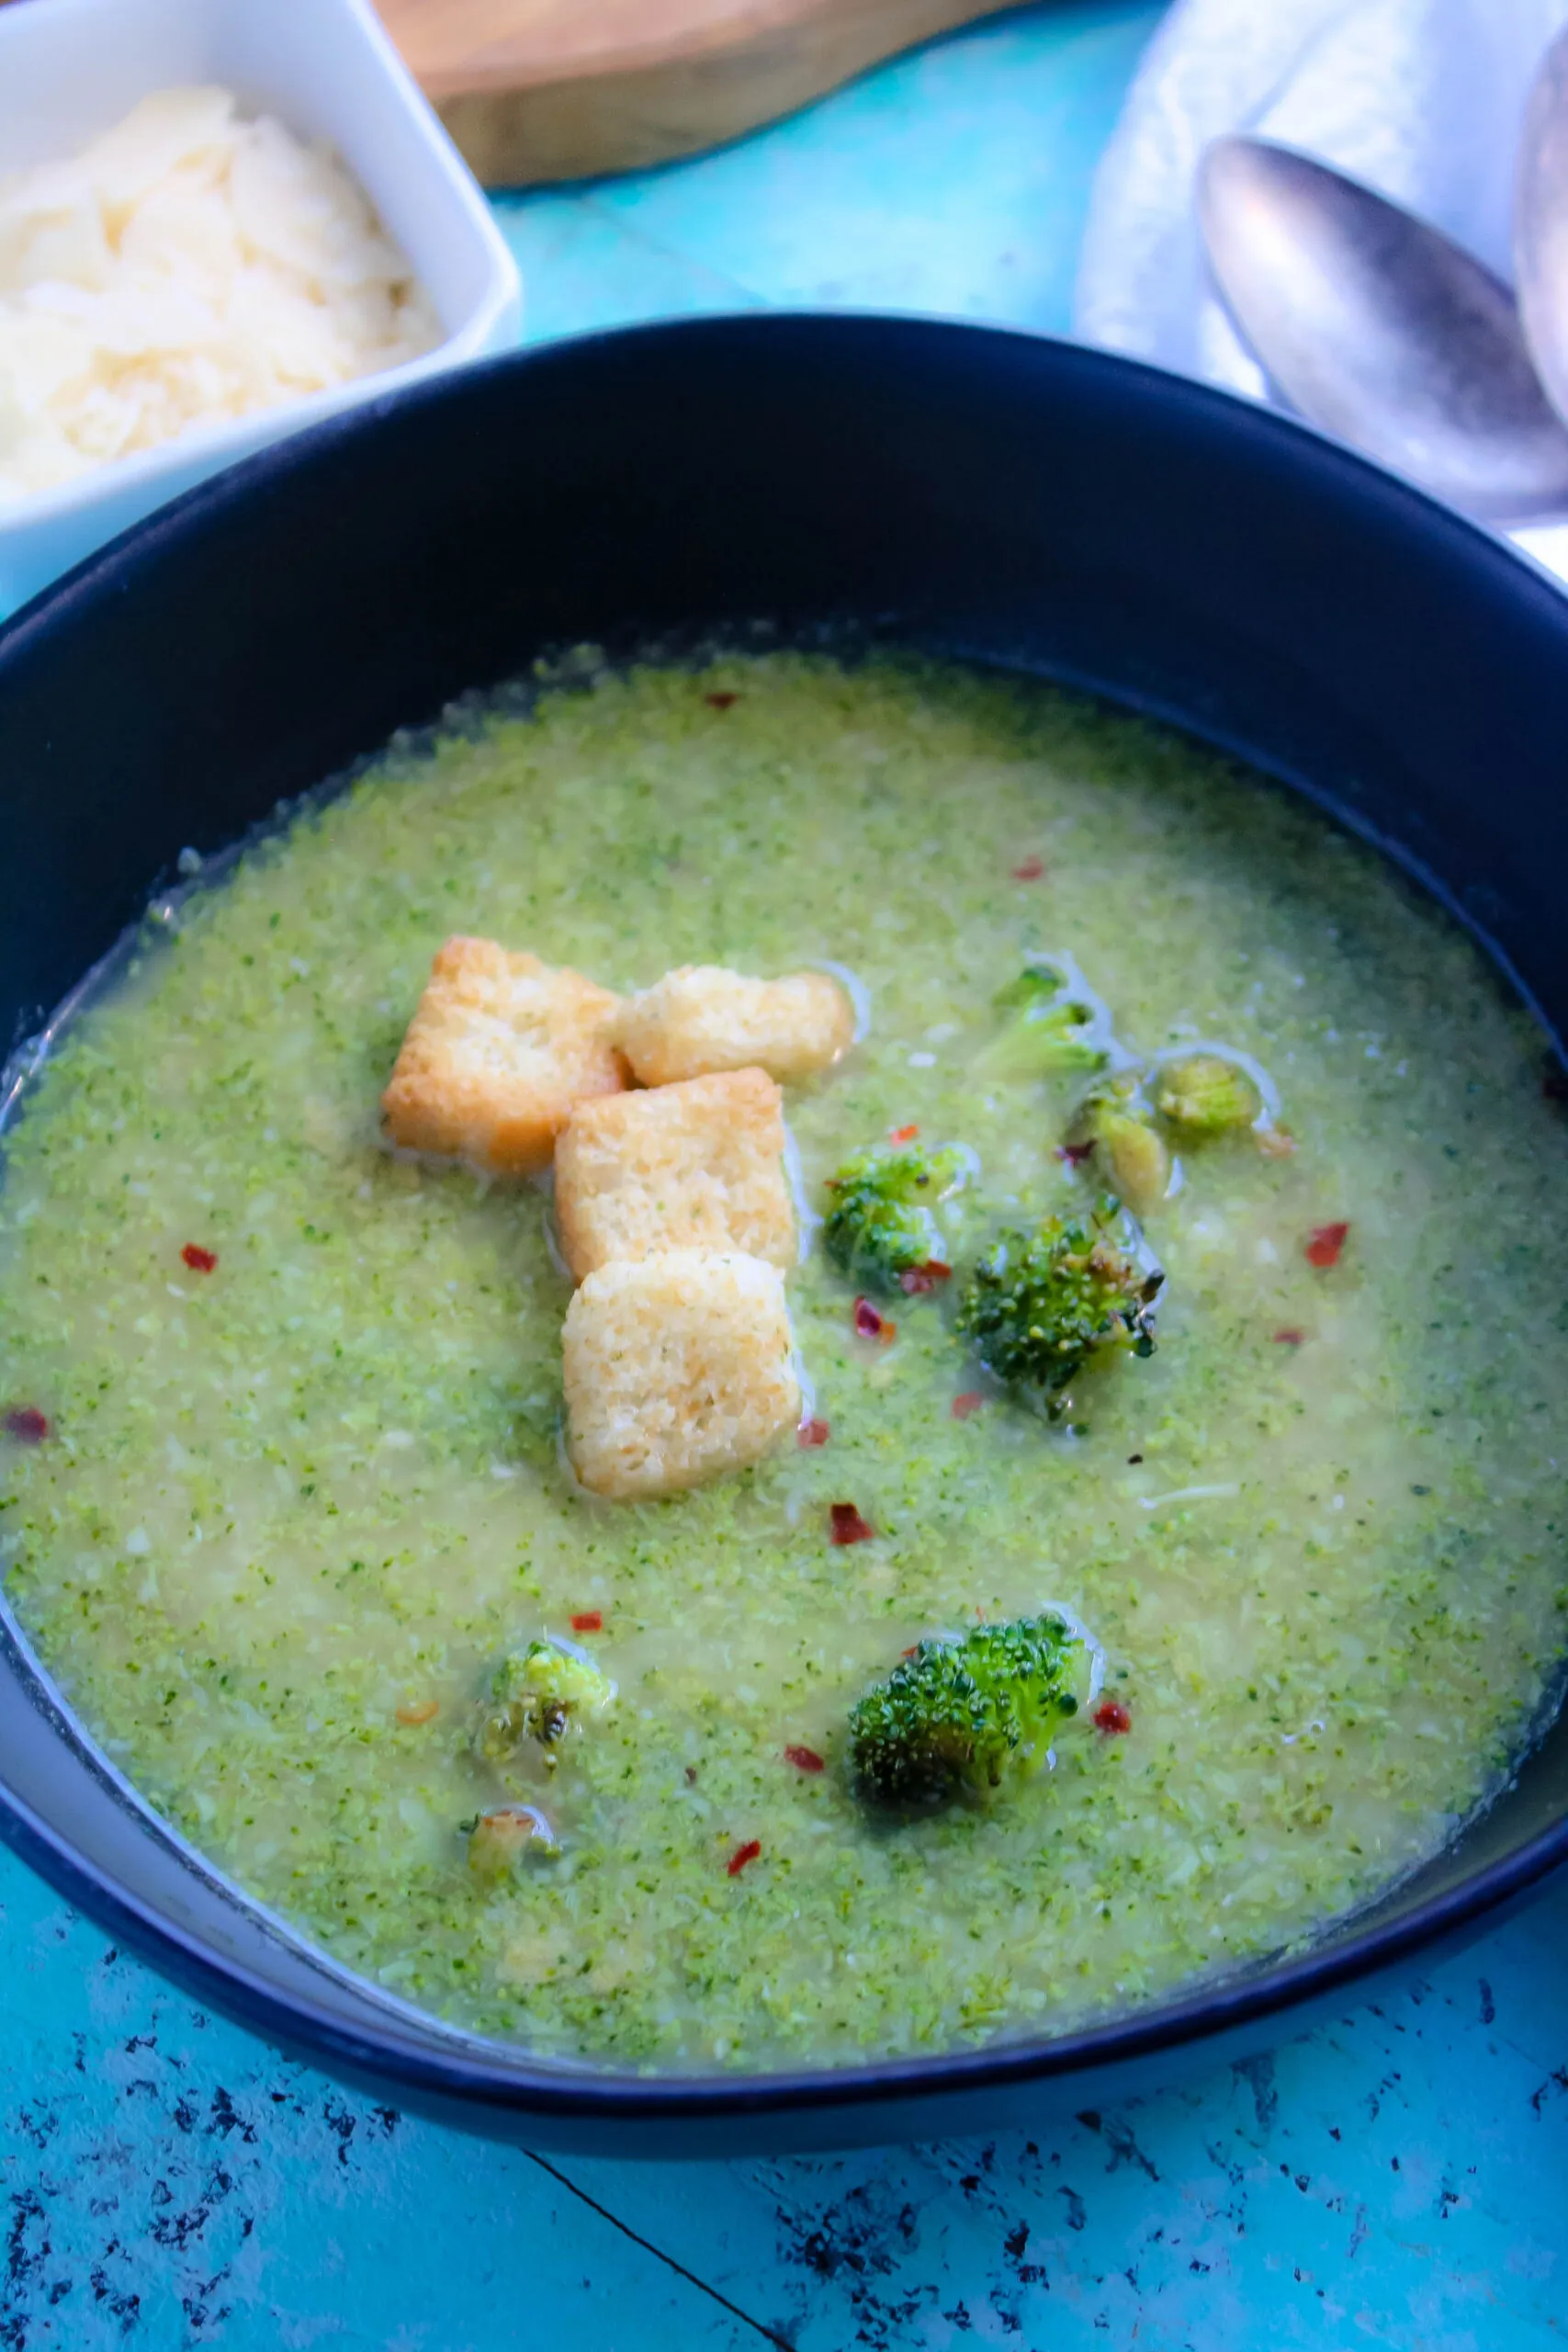 Enjoy a bowl of Broccoli and Bean Soup with Lemon on a busy night, especially when the weather turns chilly. What great flavor!